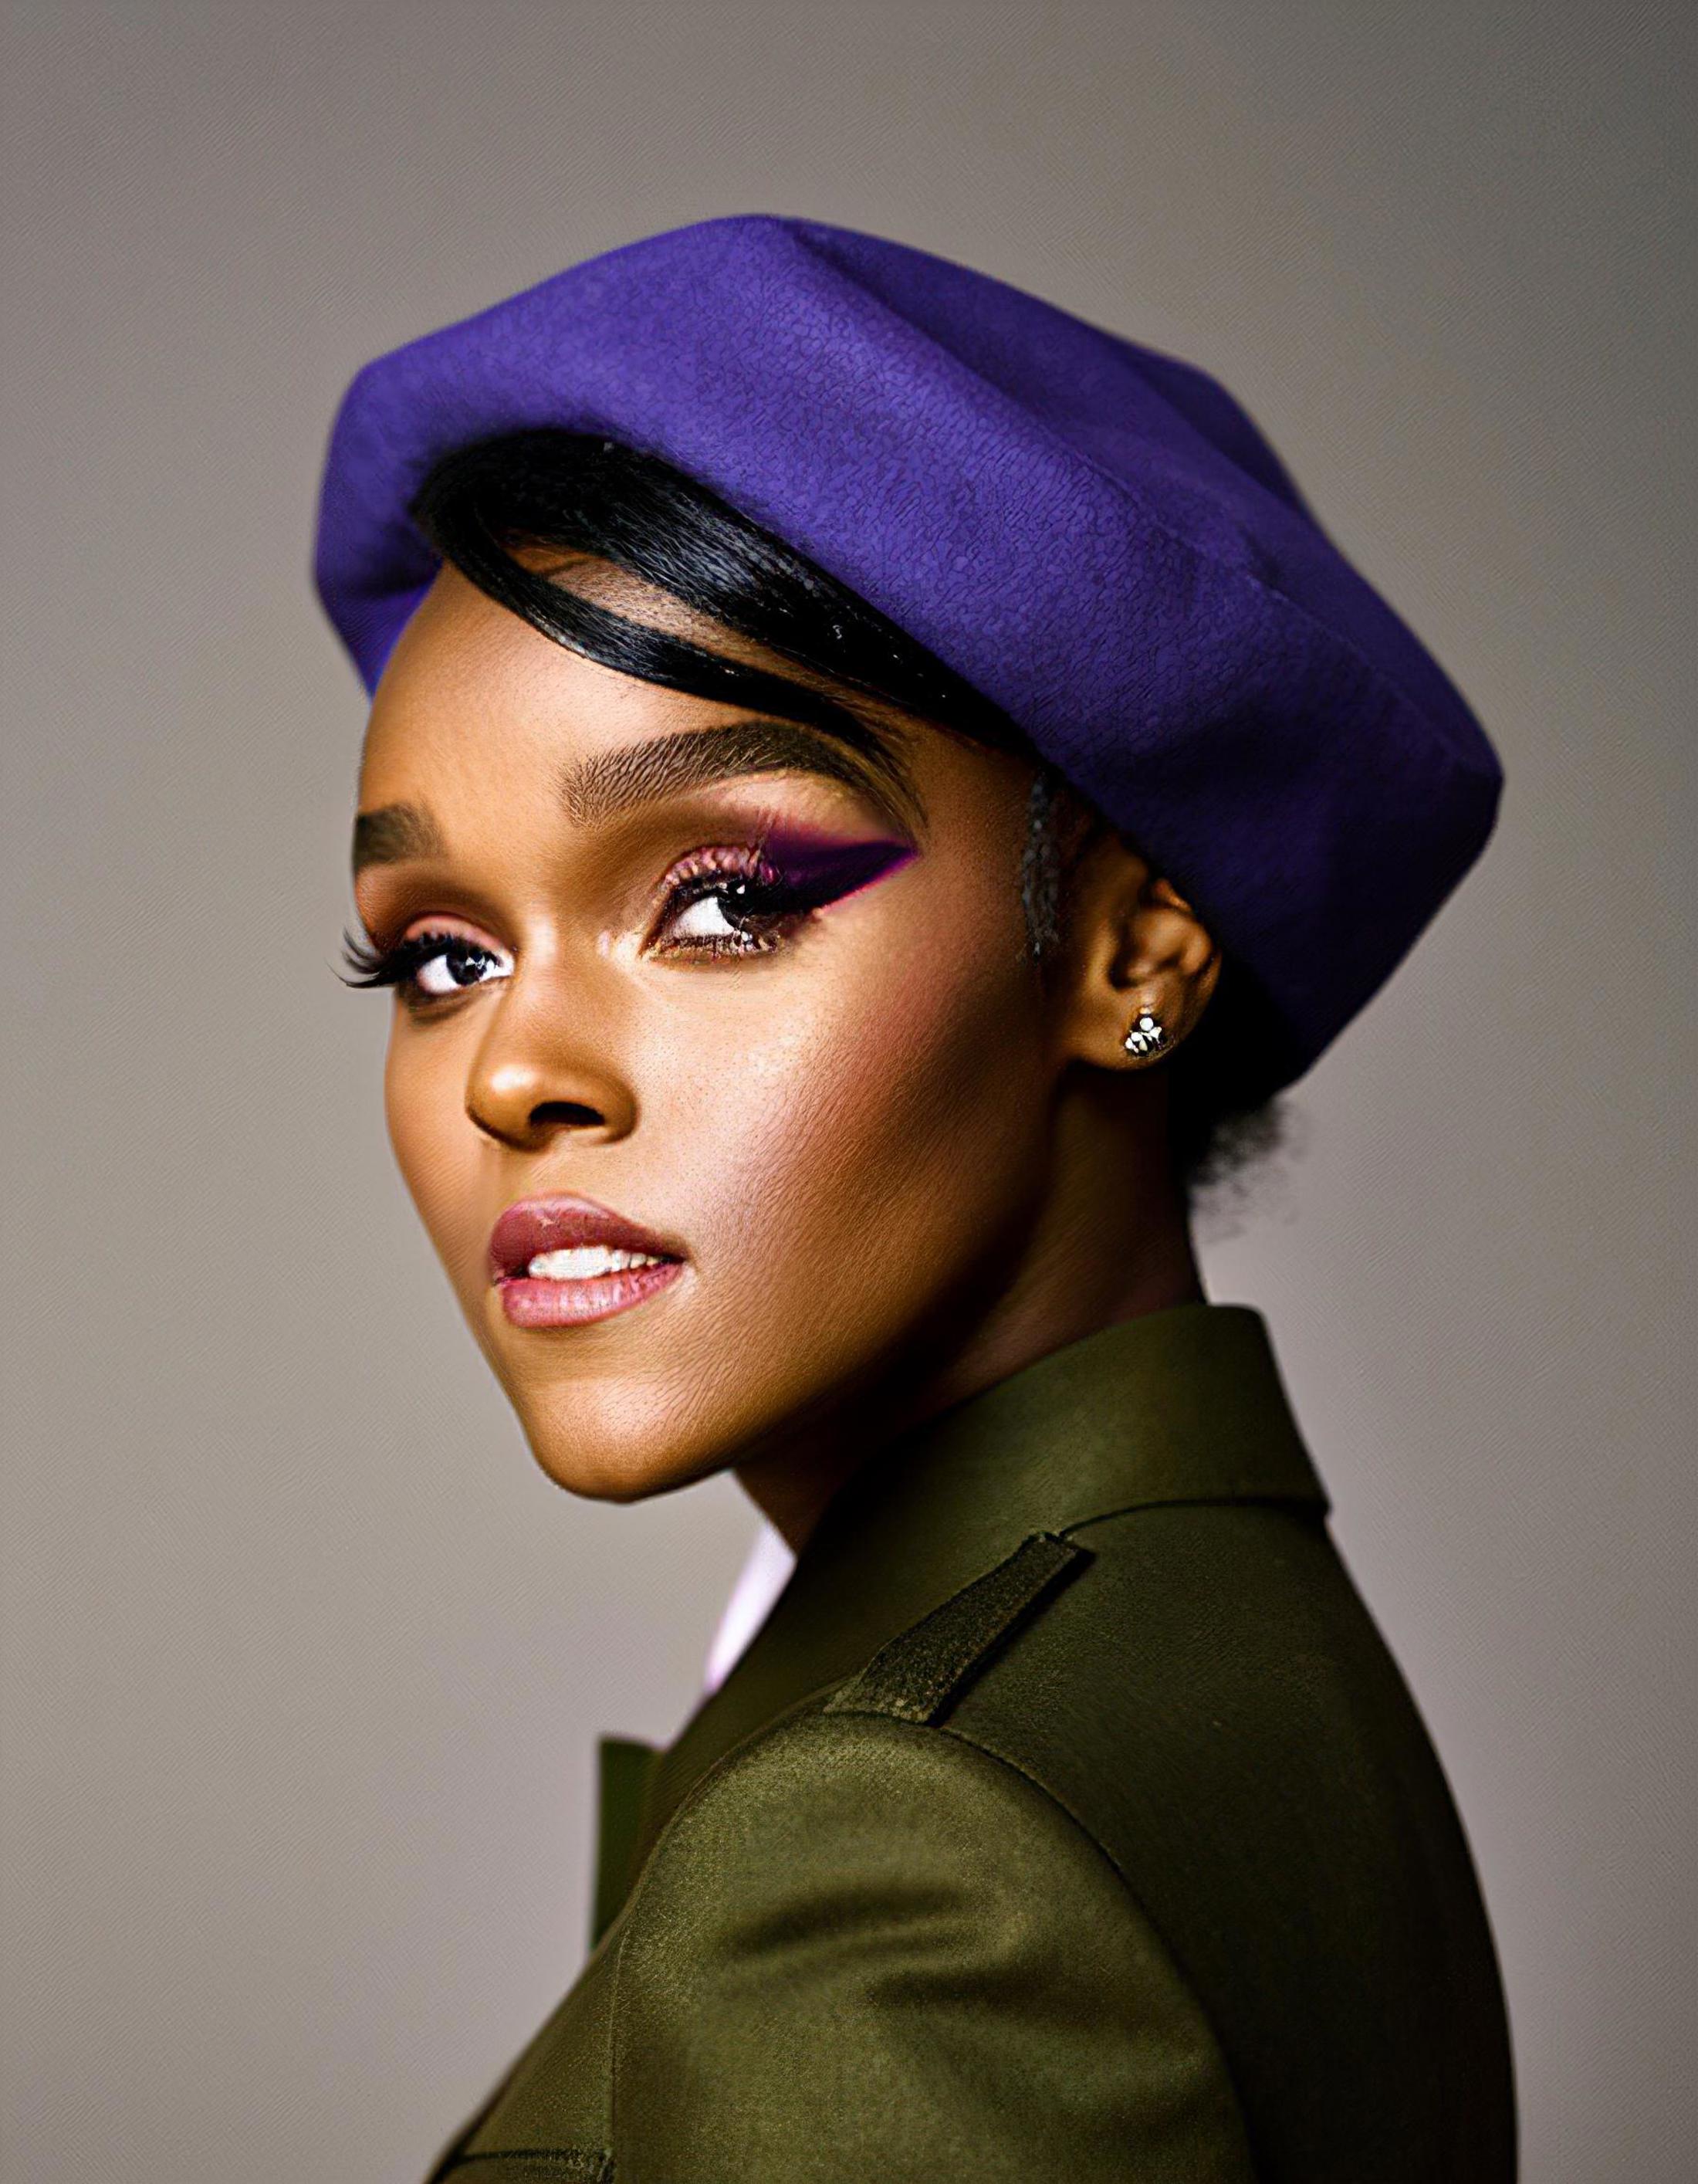 Janelle Monae (Musician/Actor) image by Smoke_Room